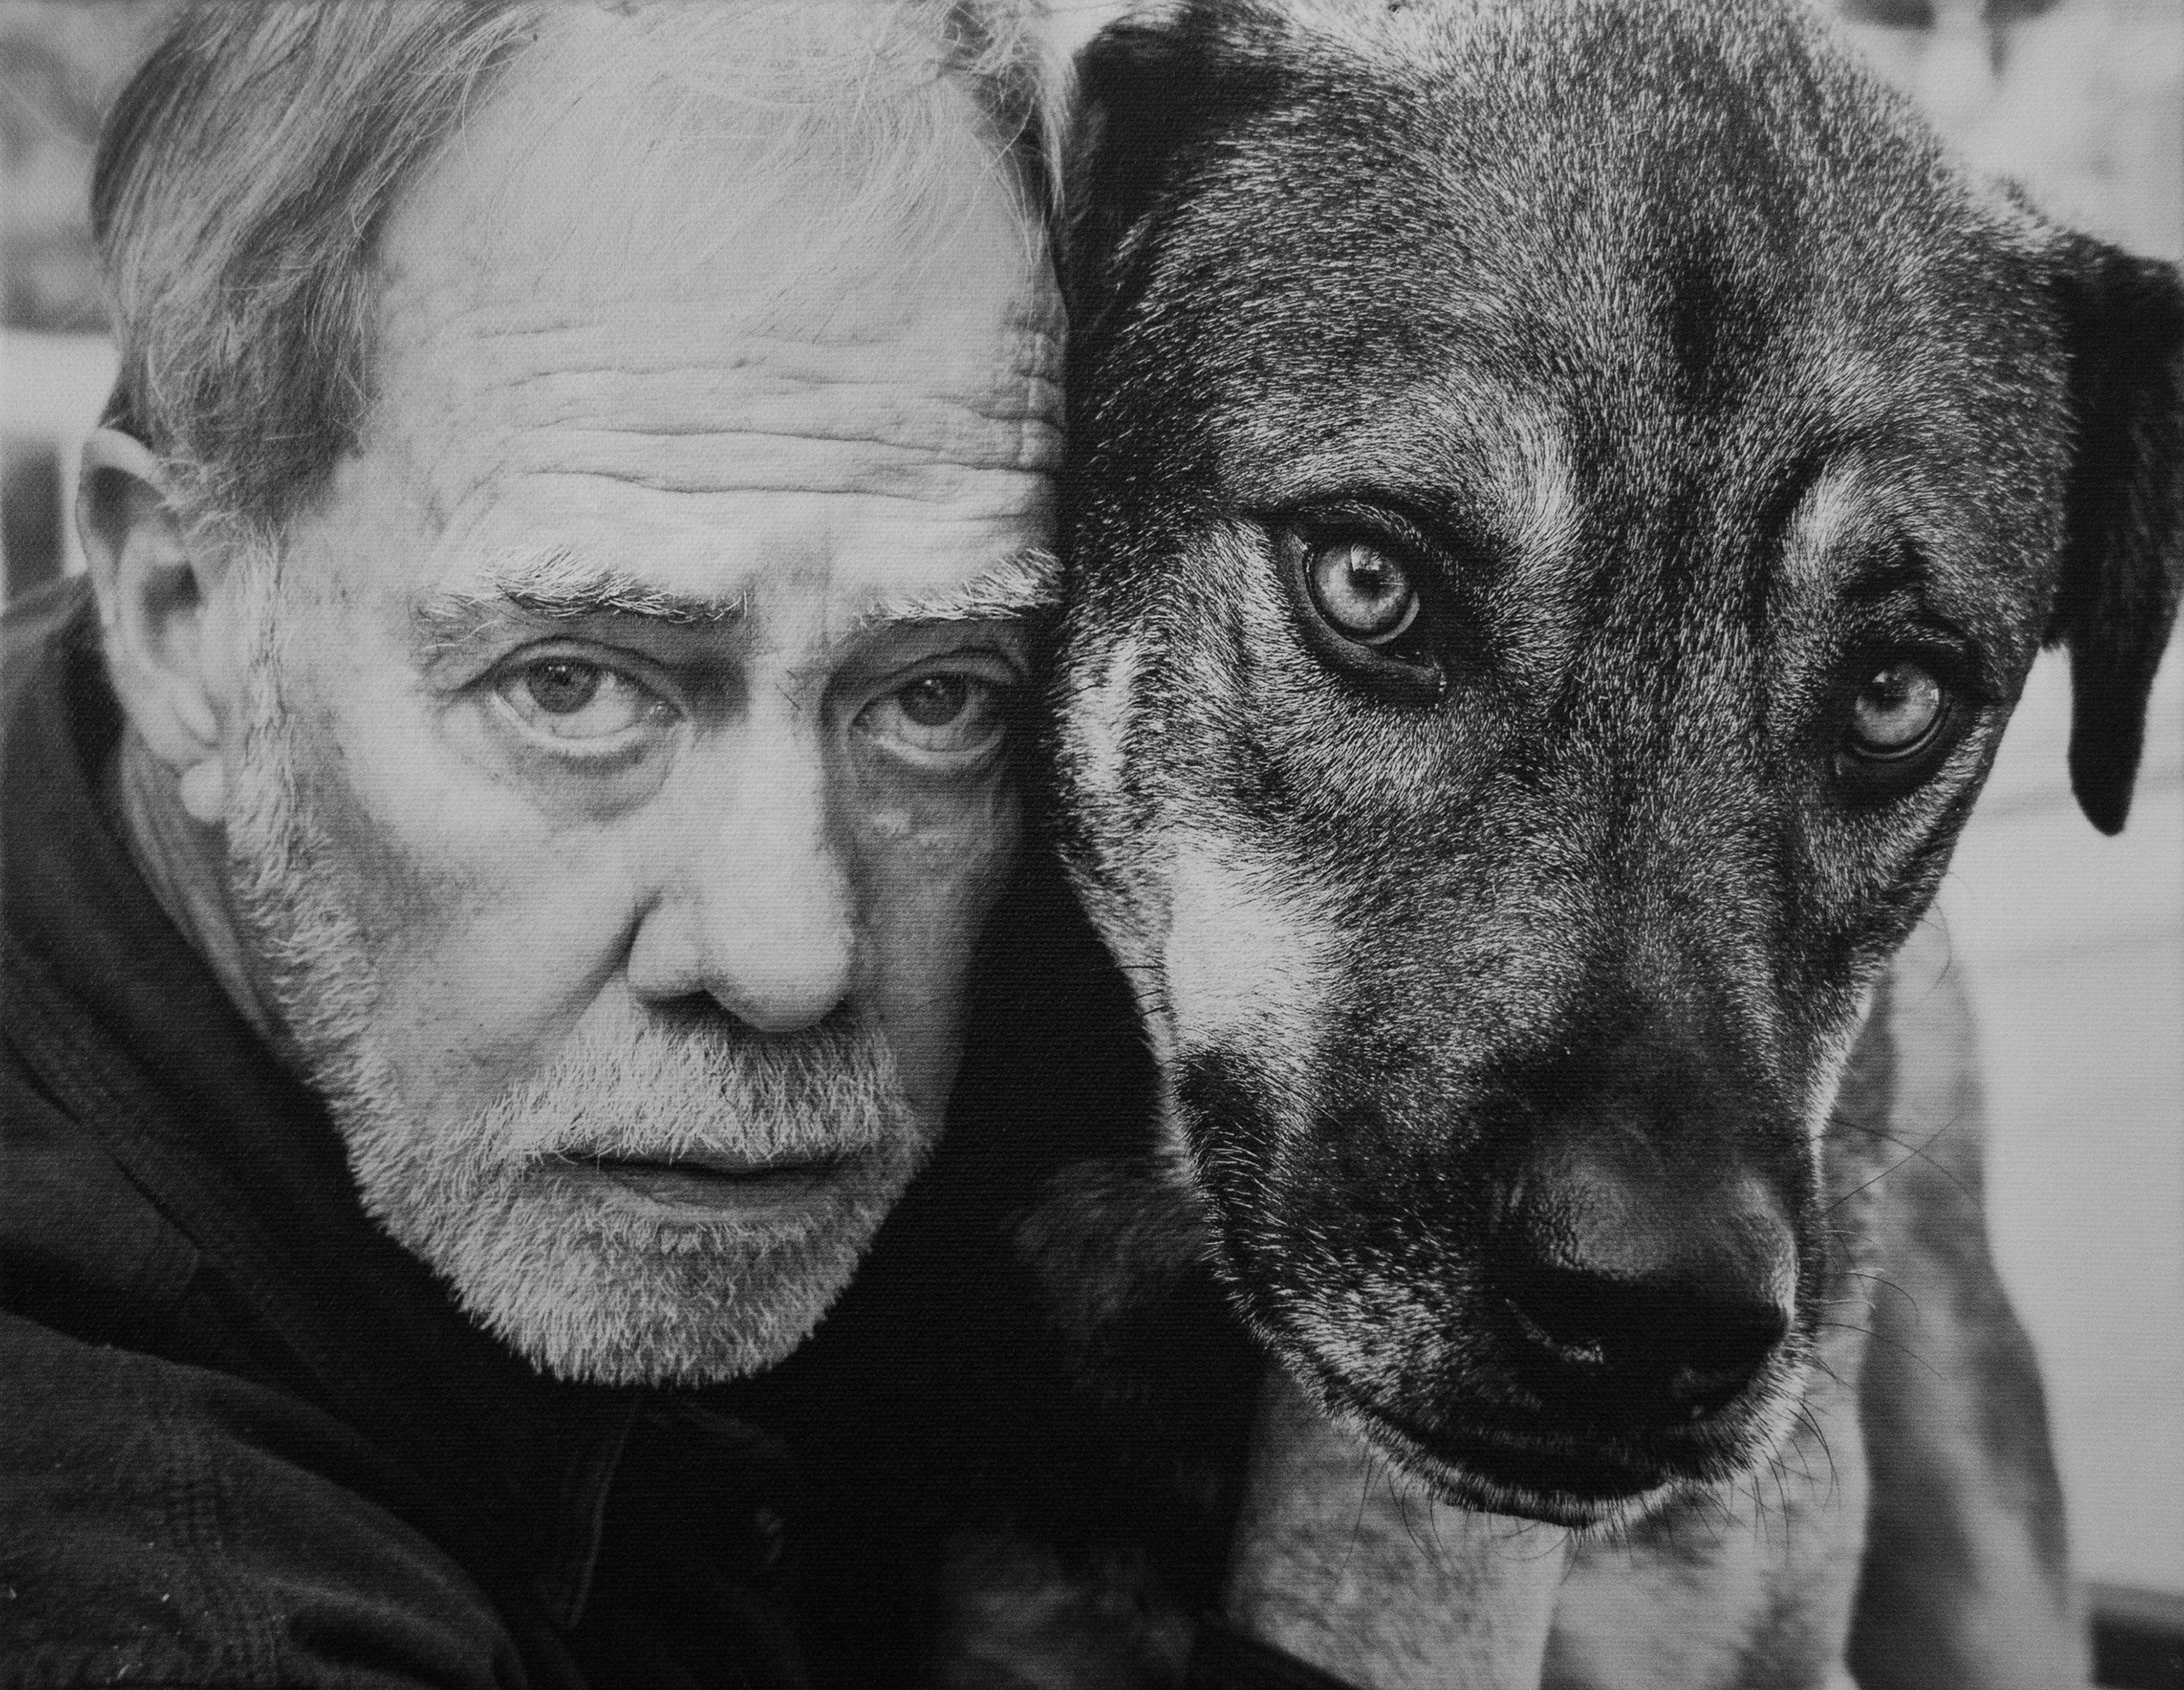 Image of featured artist, Brian Blauser, and his long-time field companion, Taj.